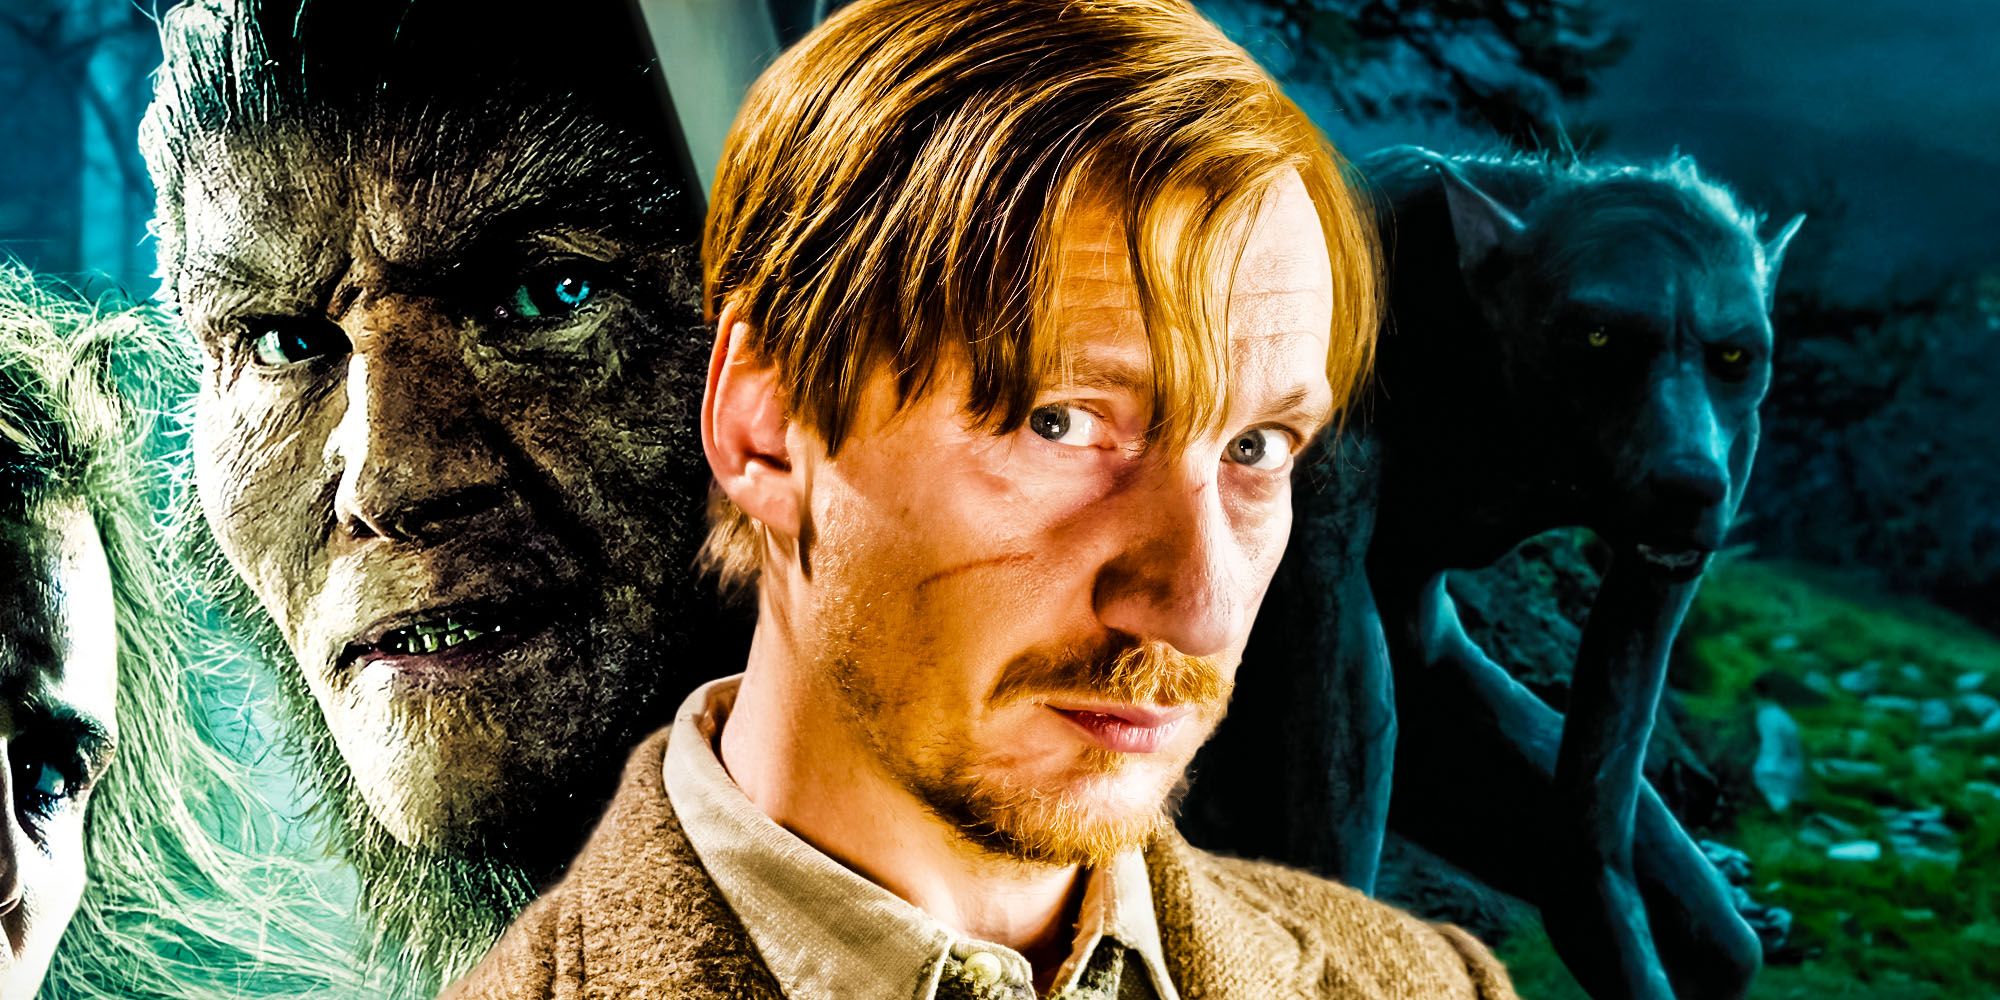 Harry potter and the prisoner of Azkaban Remus Lupin and Fenrir Greyback Look So Different As Werewolves